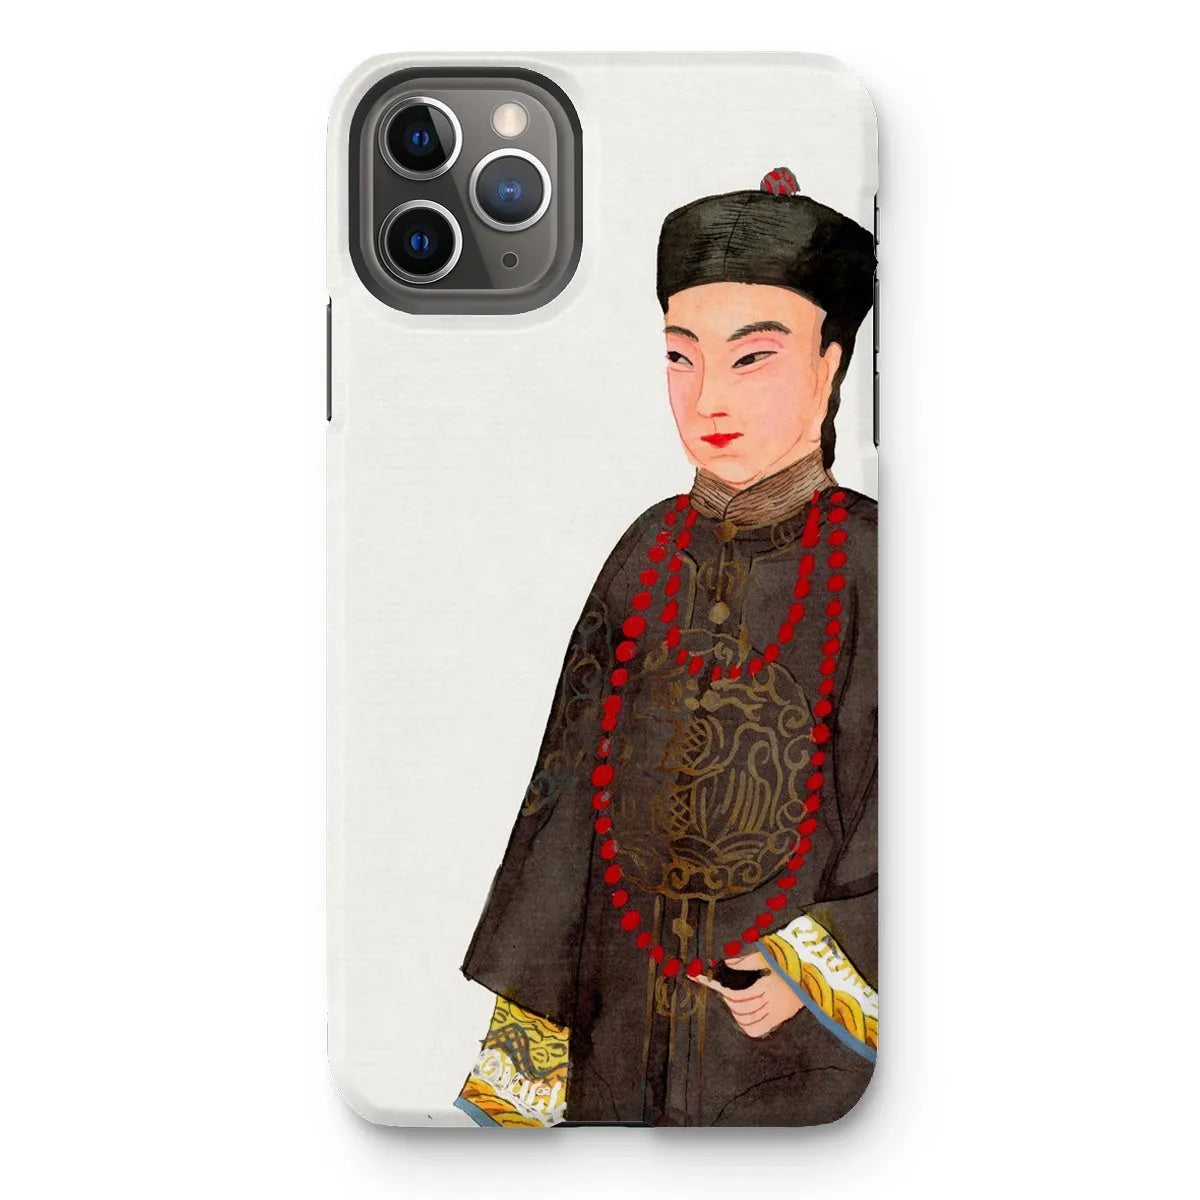 Emperor’s Courtier - Chinese Manchu Aesthetic Art Phone Case - Iphone 11 Pro Max / Matte - Mobile Phone Cases